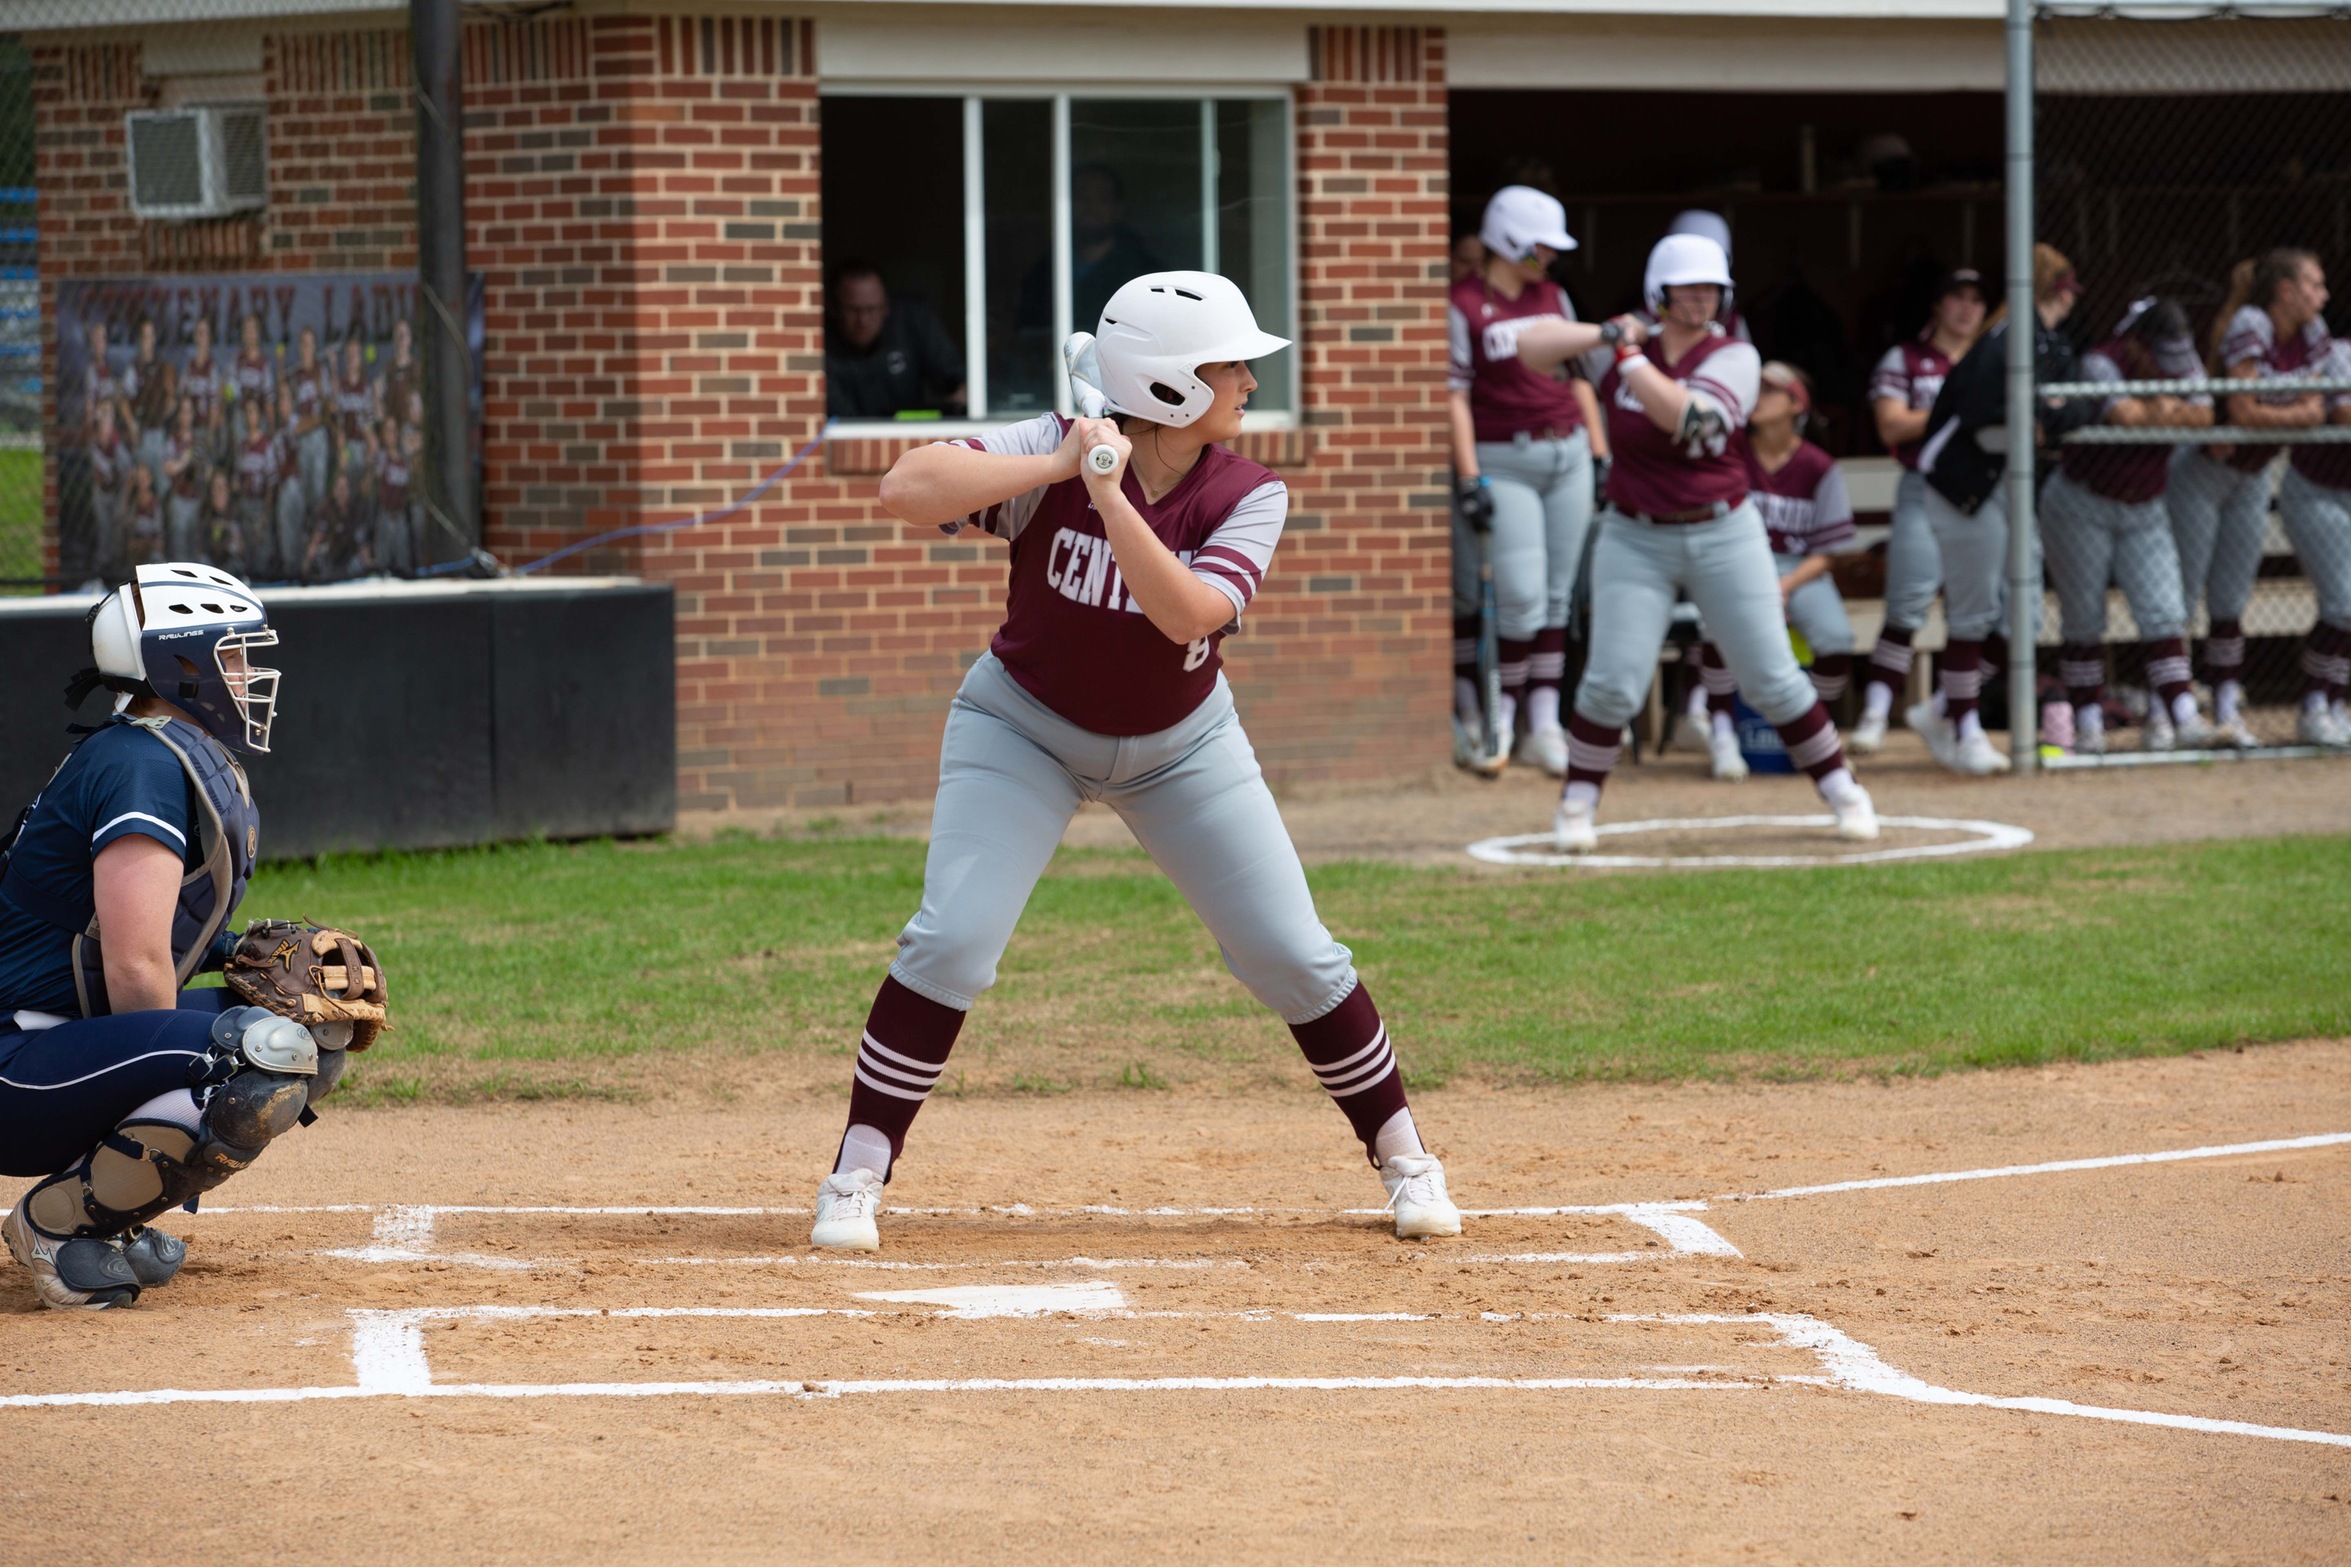 Erin Lewis Named SCAC Softball Hitter of the Week